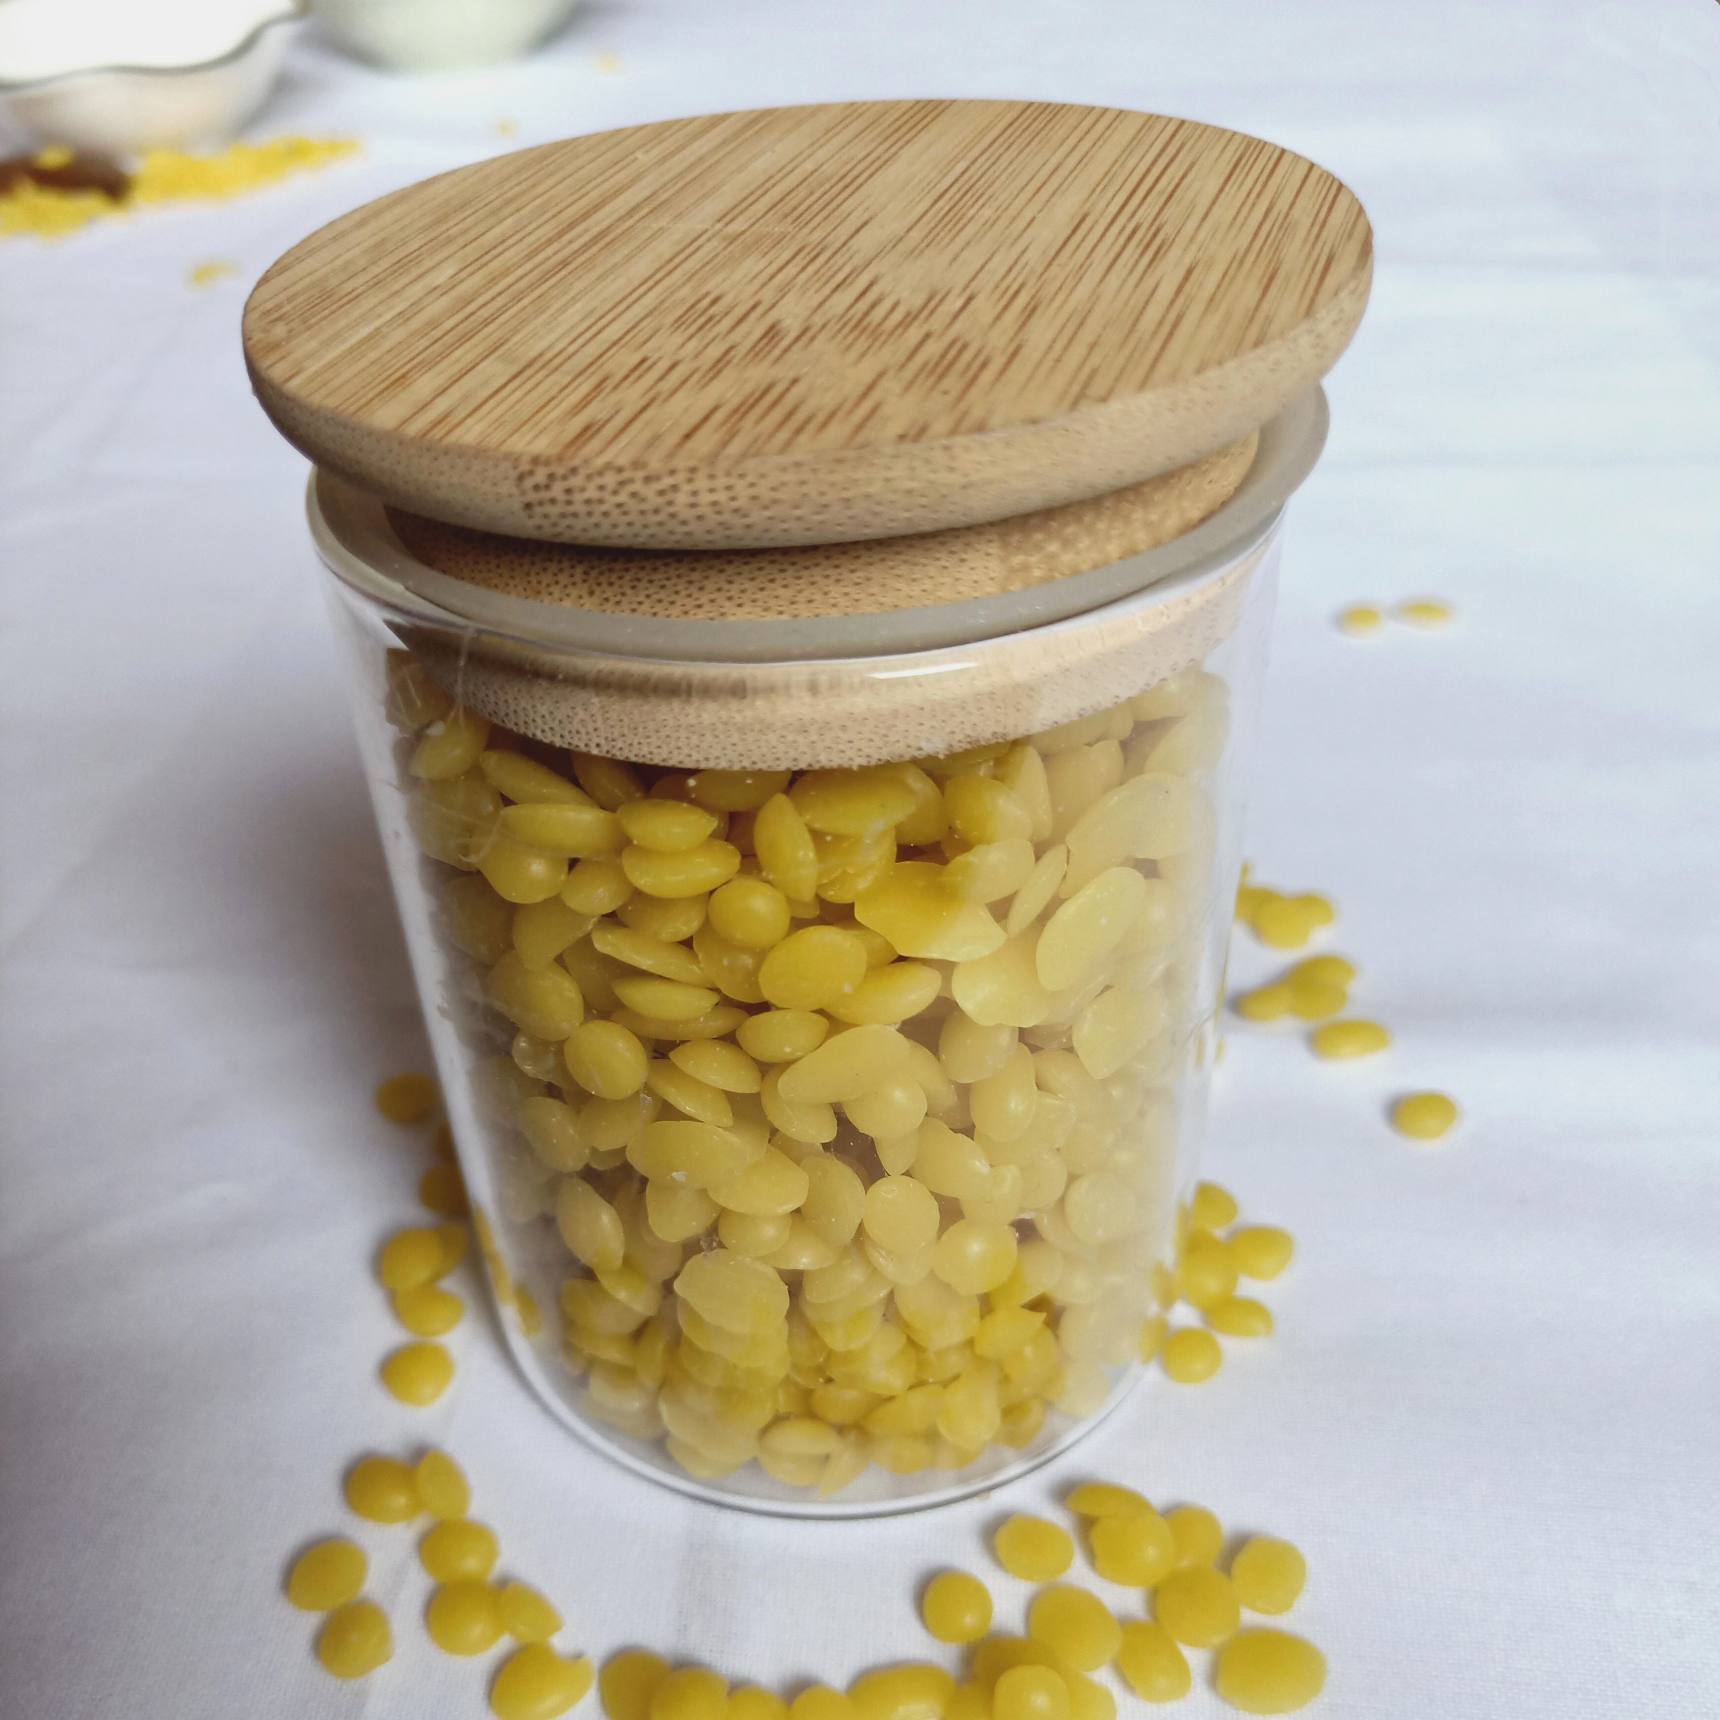 Natural Pure Beeswax Pellets Beads Wax Material for Candle Making